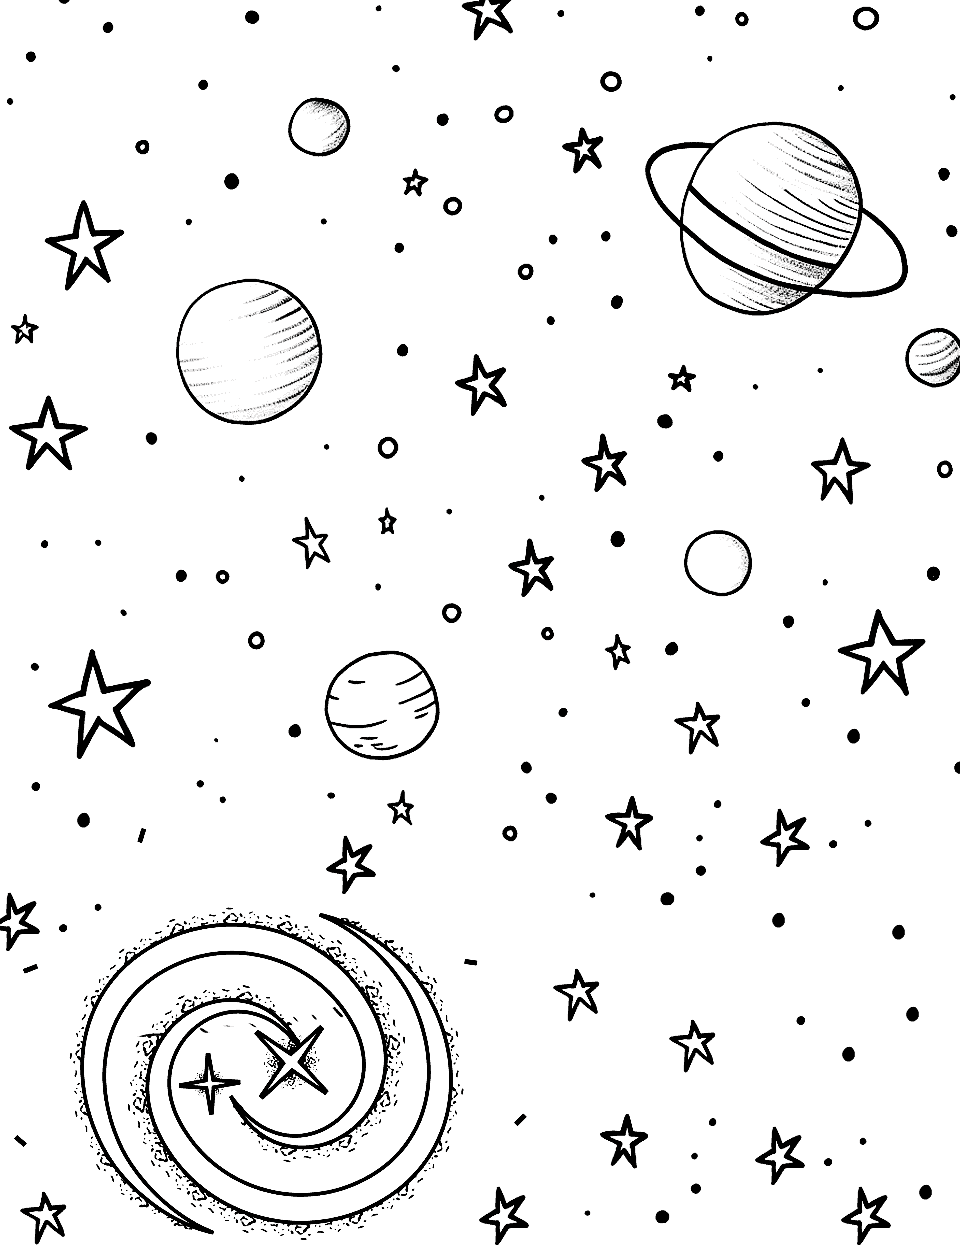 Galaxy Exploration Star Coloring Page - A galaxy scene filled with stars, planets, and a swirling galaxy.